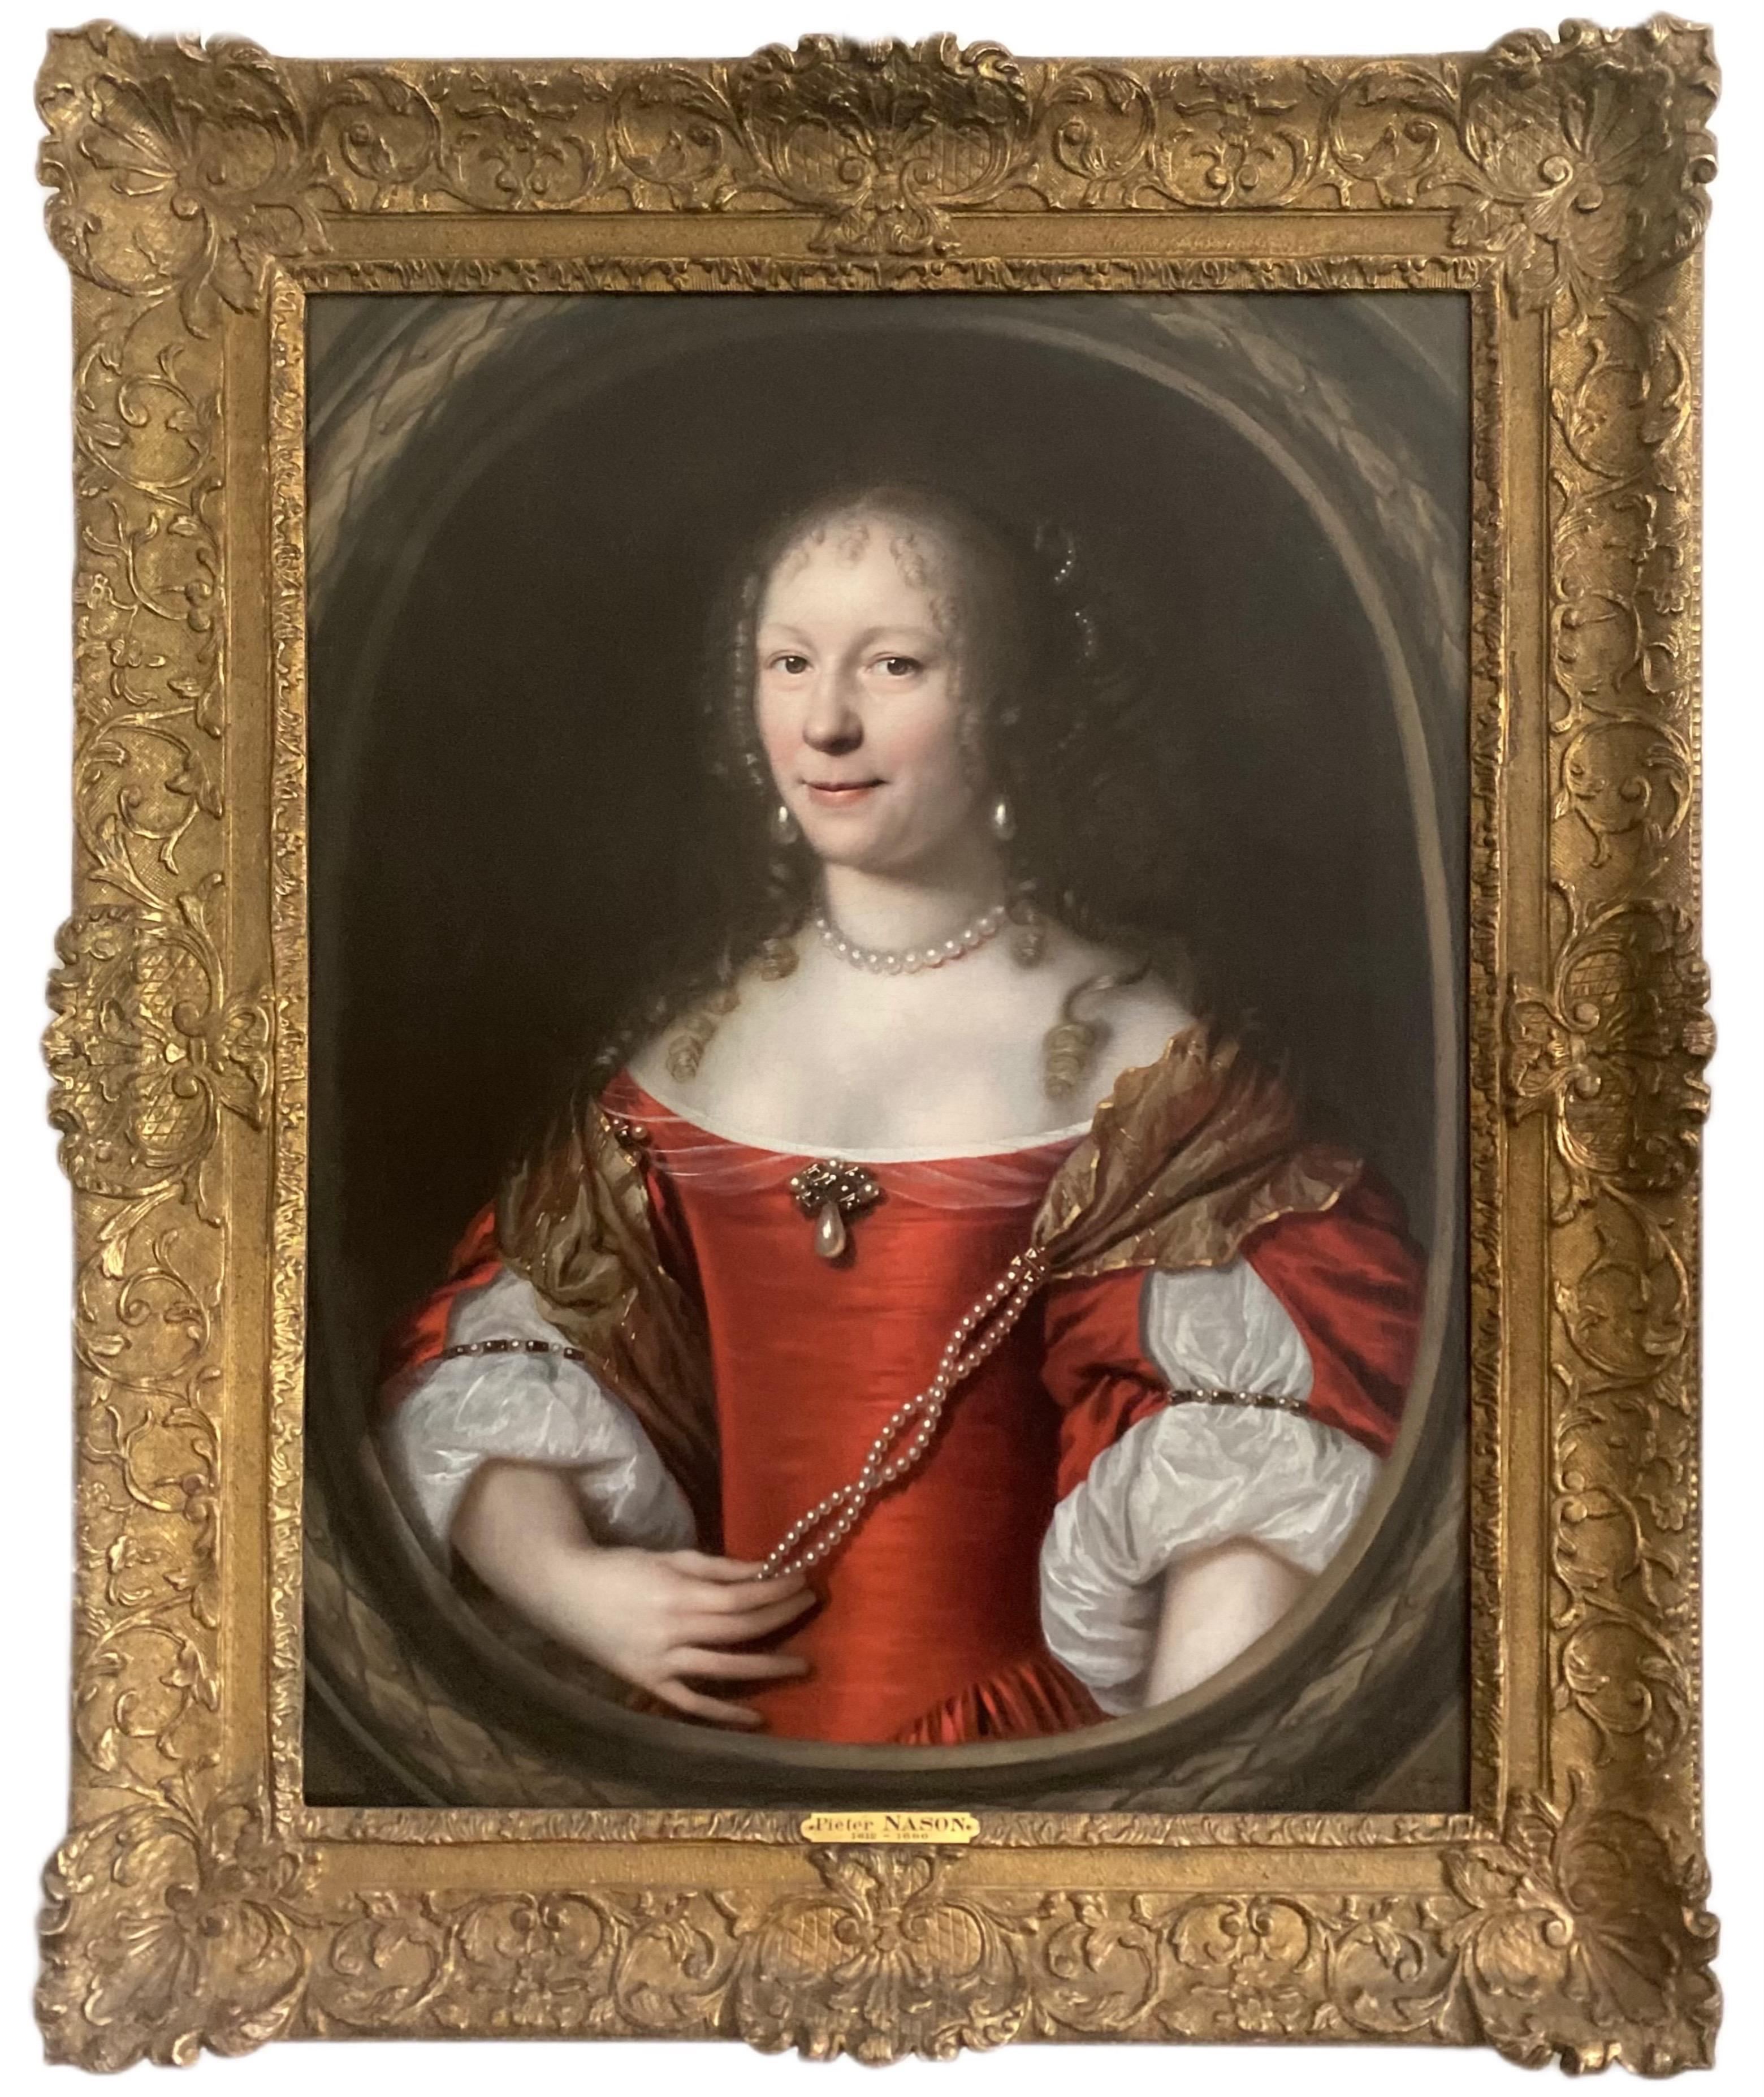 Pieter Nason  Portrait Painting - 17th century Dutch portrait of a Lady in Red adorned with Pearls